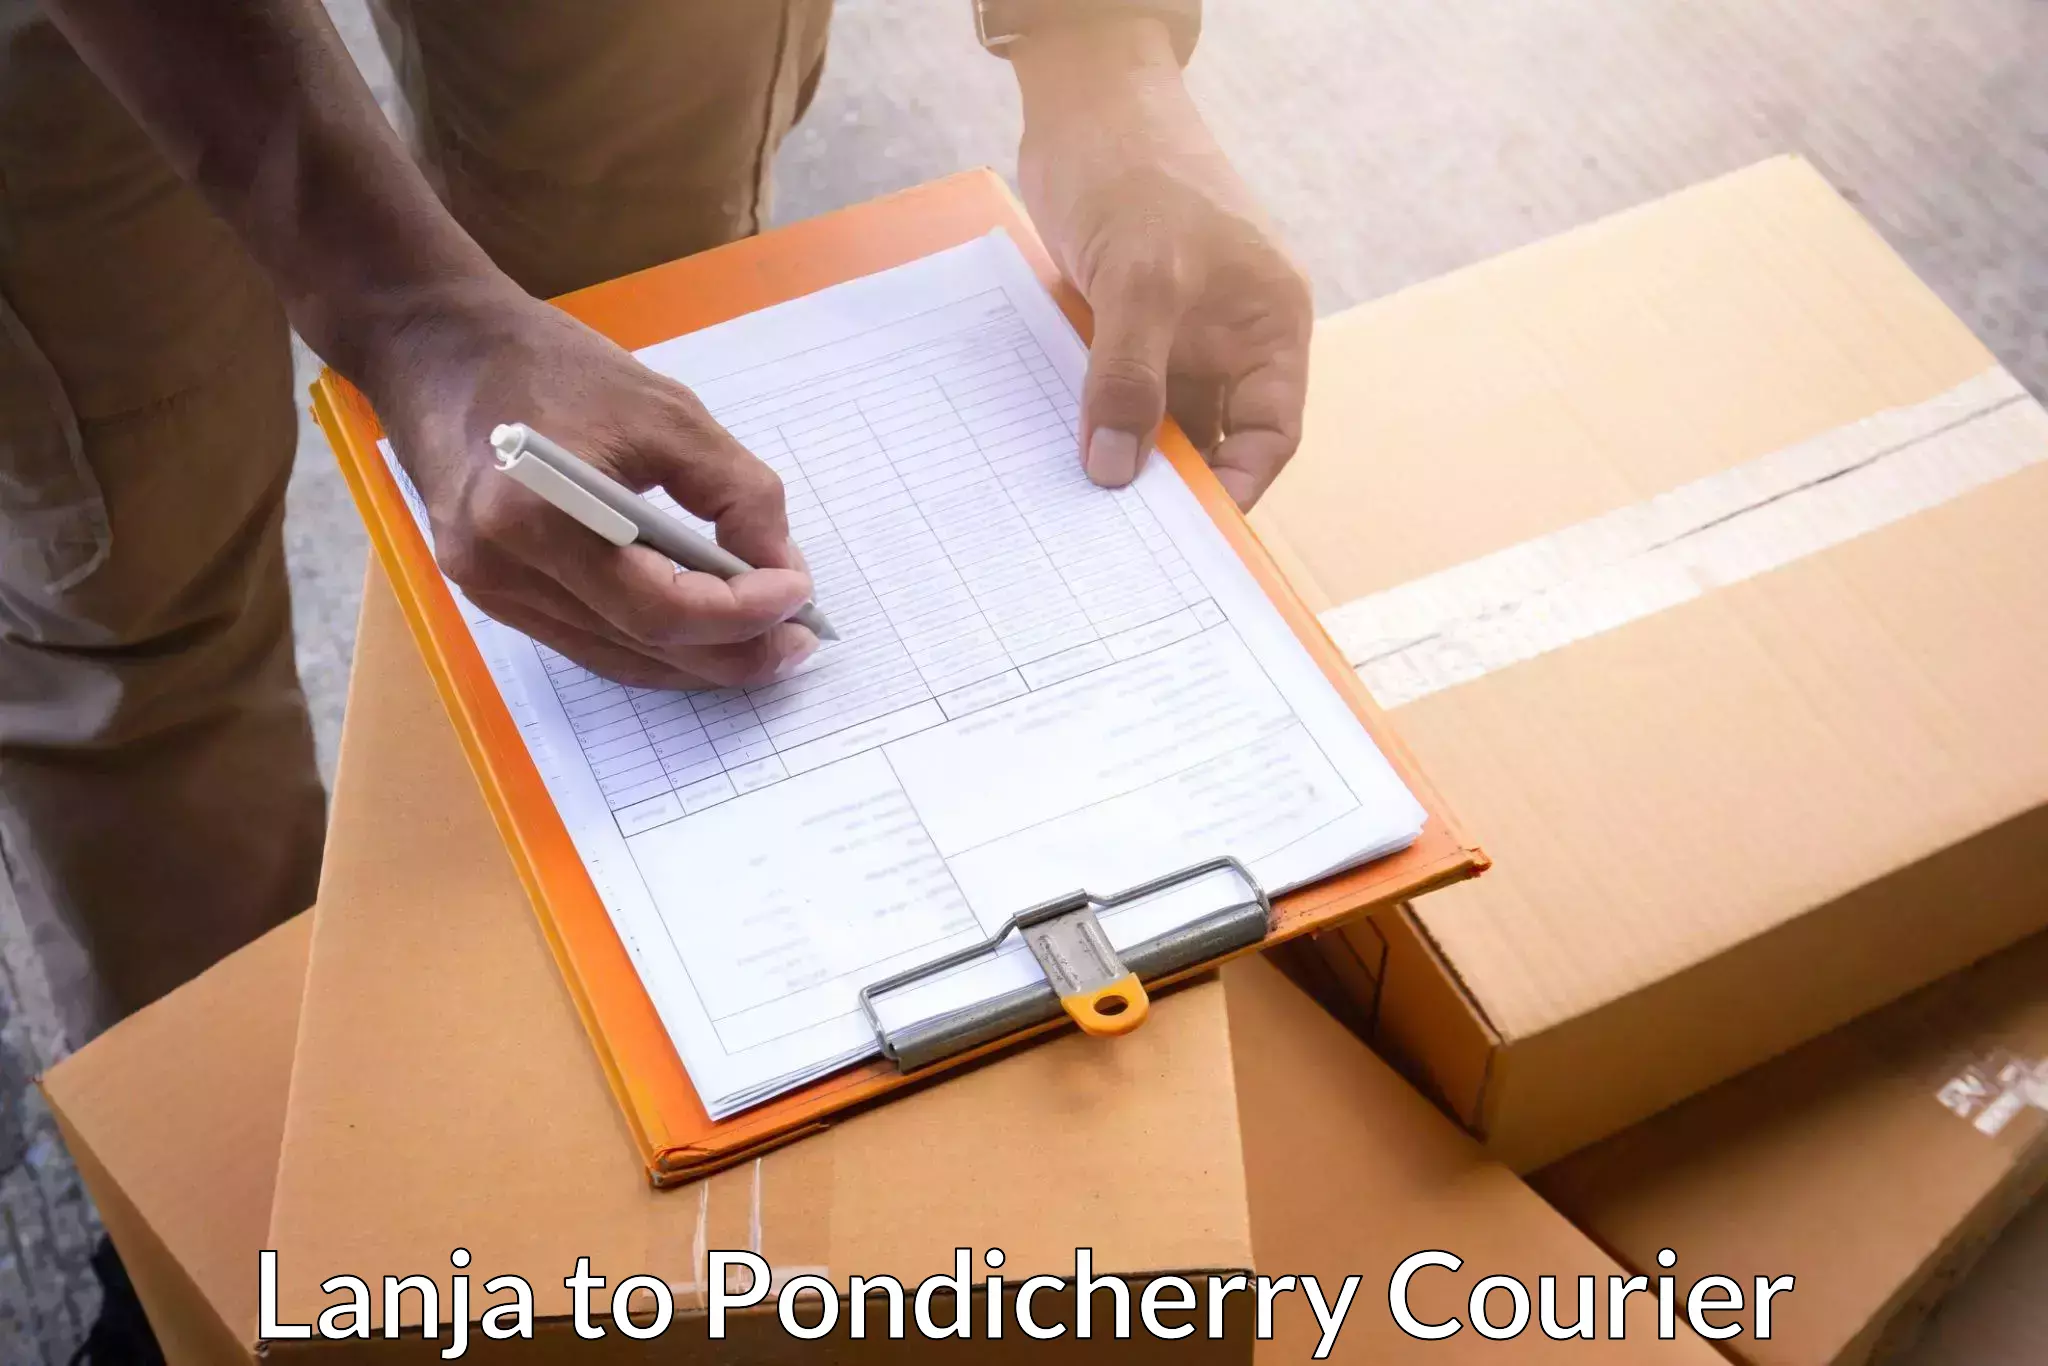 Same-day delivery options Lanja to Pondicherry